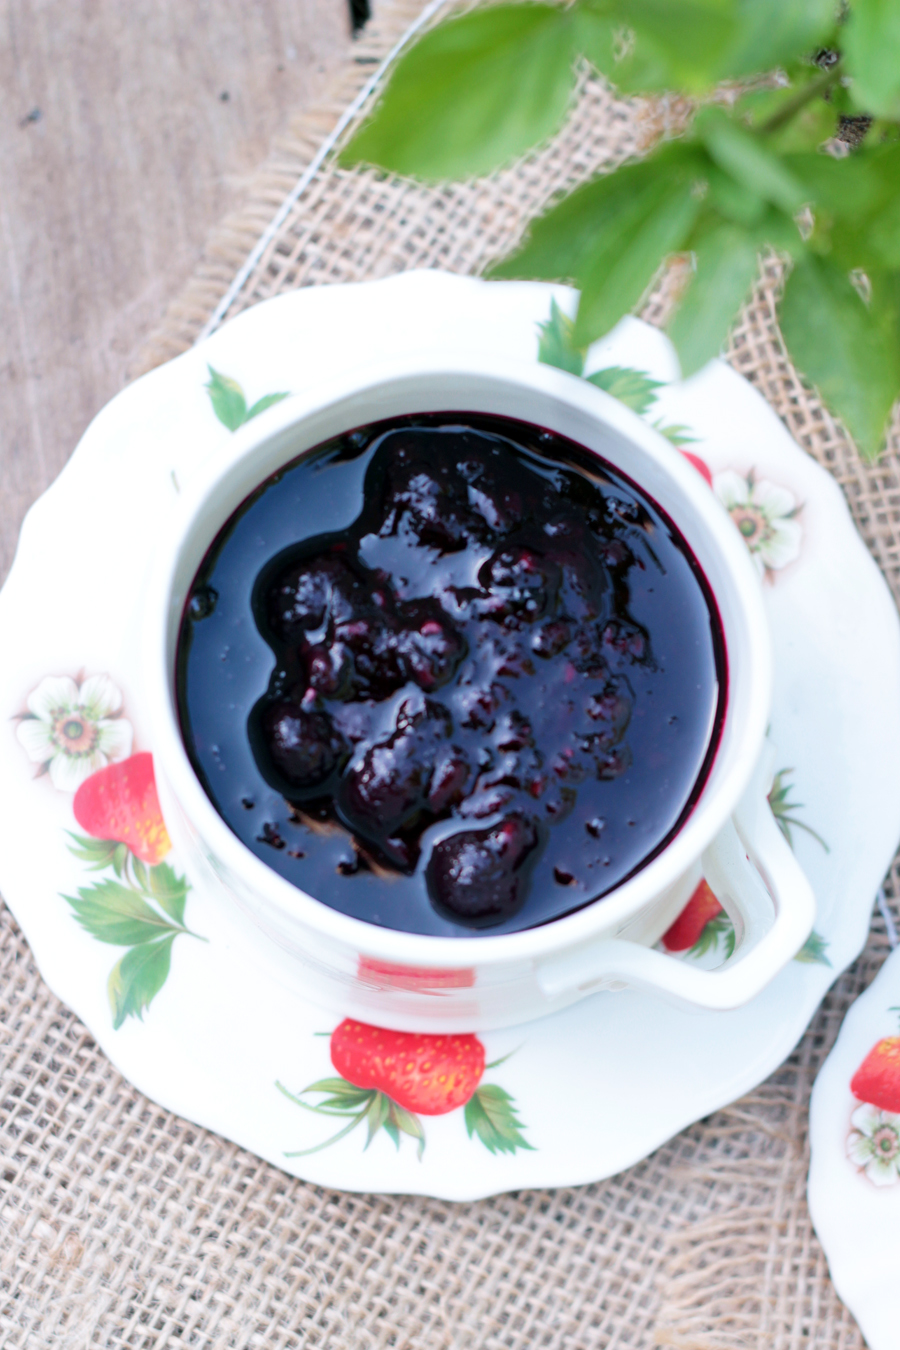 Berry Coulis is simple to make and a wonderful sauce for both sweet and savory foods.